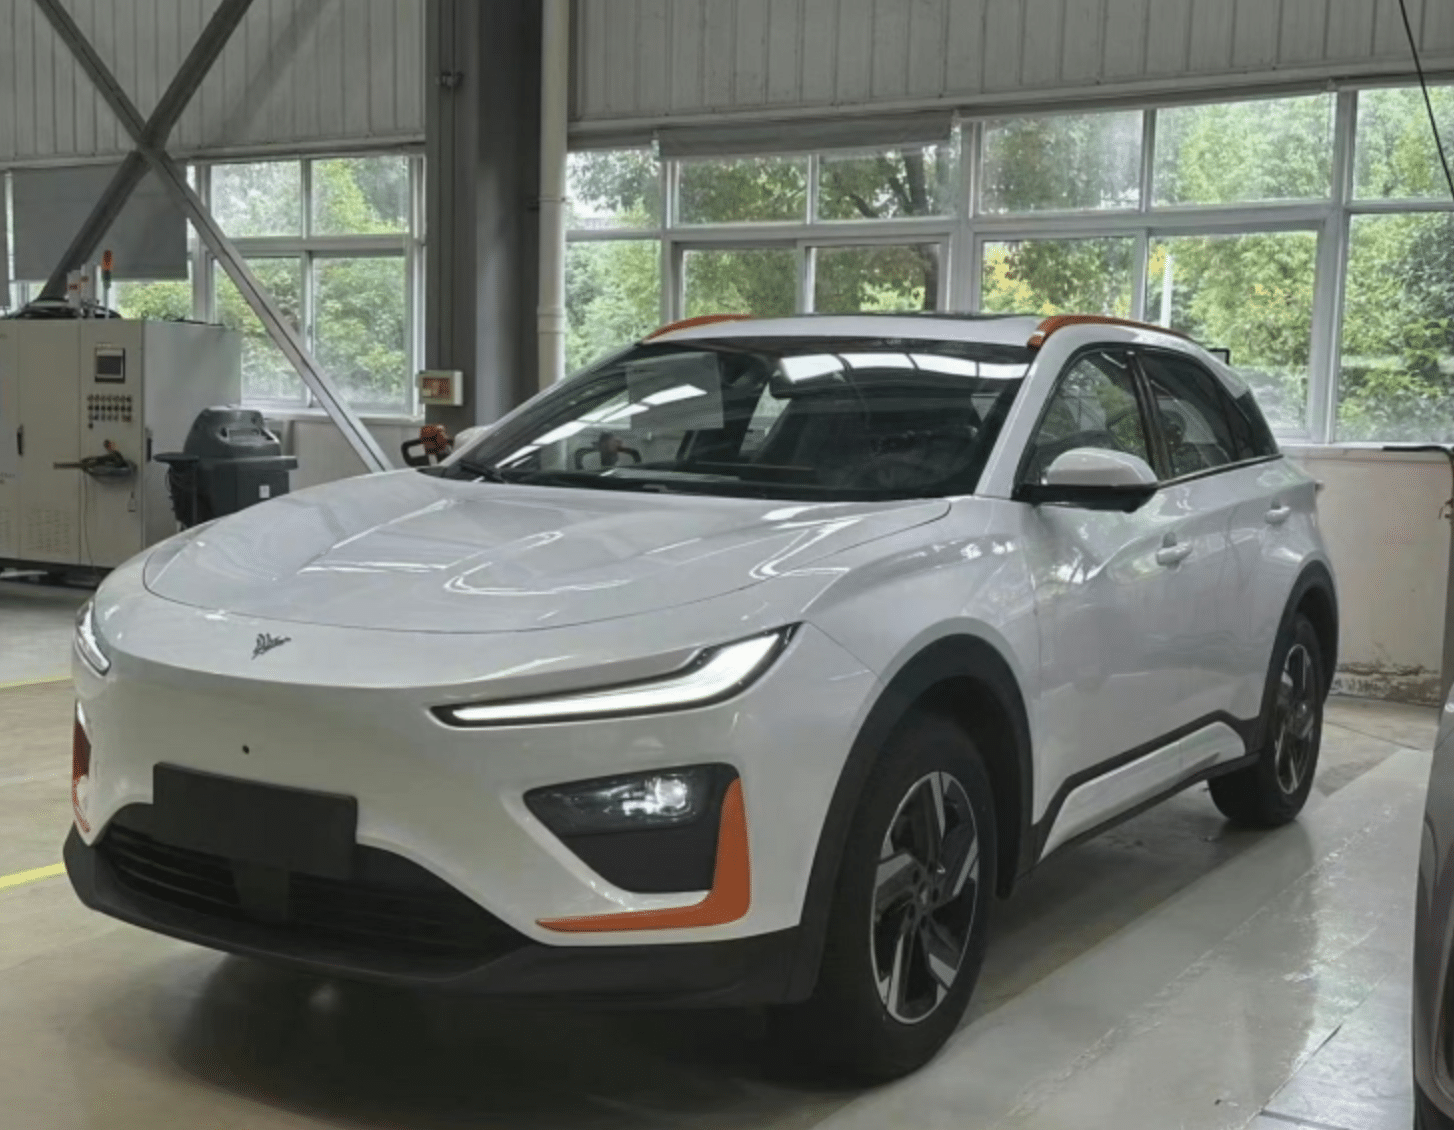 Hozon publishes electric SUV Neta X official photo, sales expected this quarter